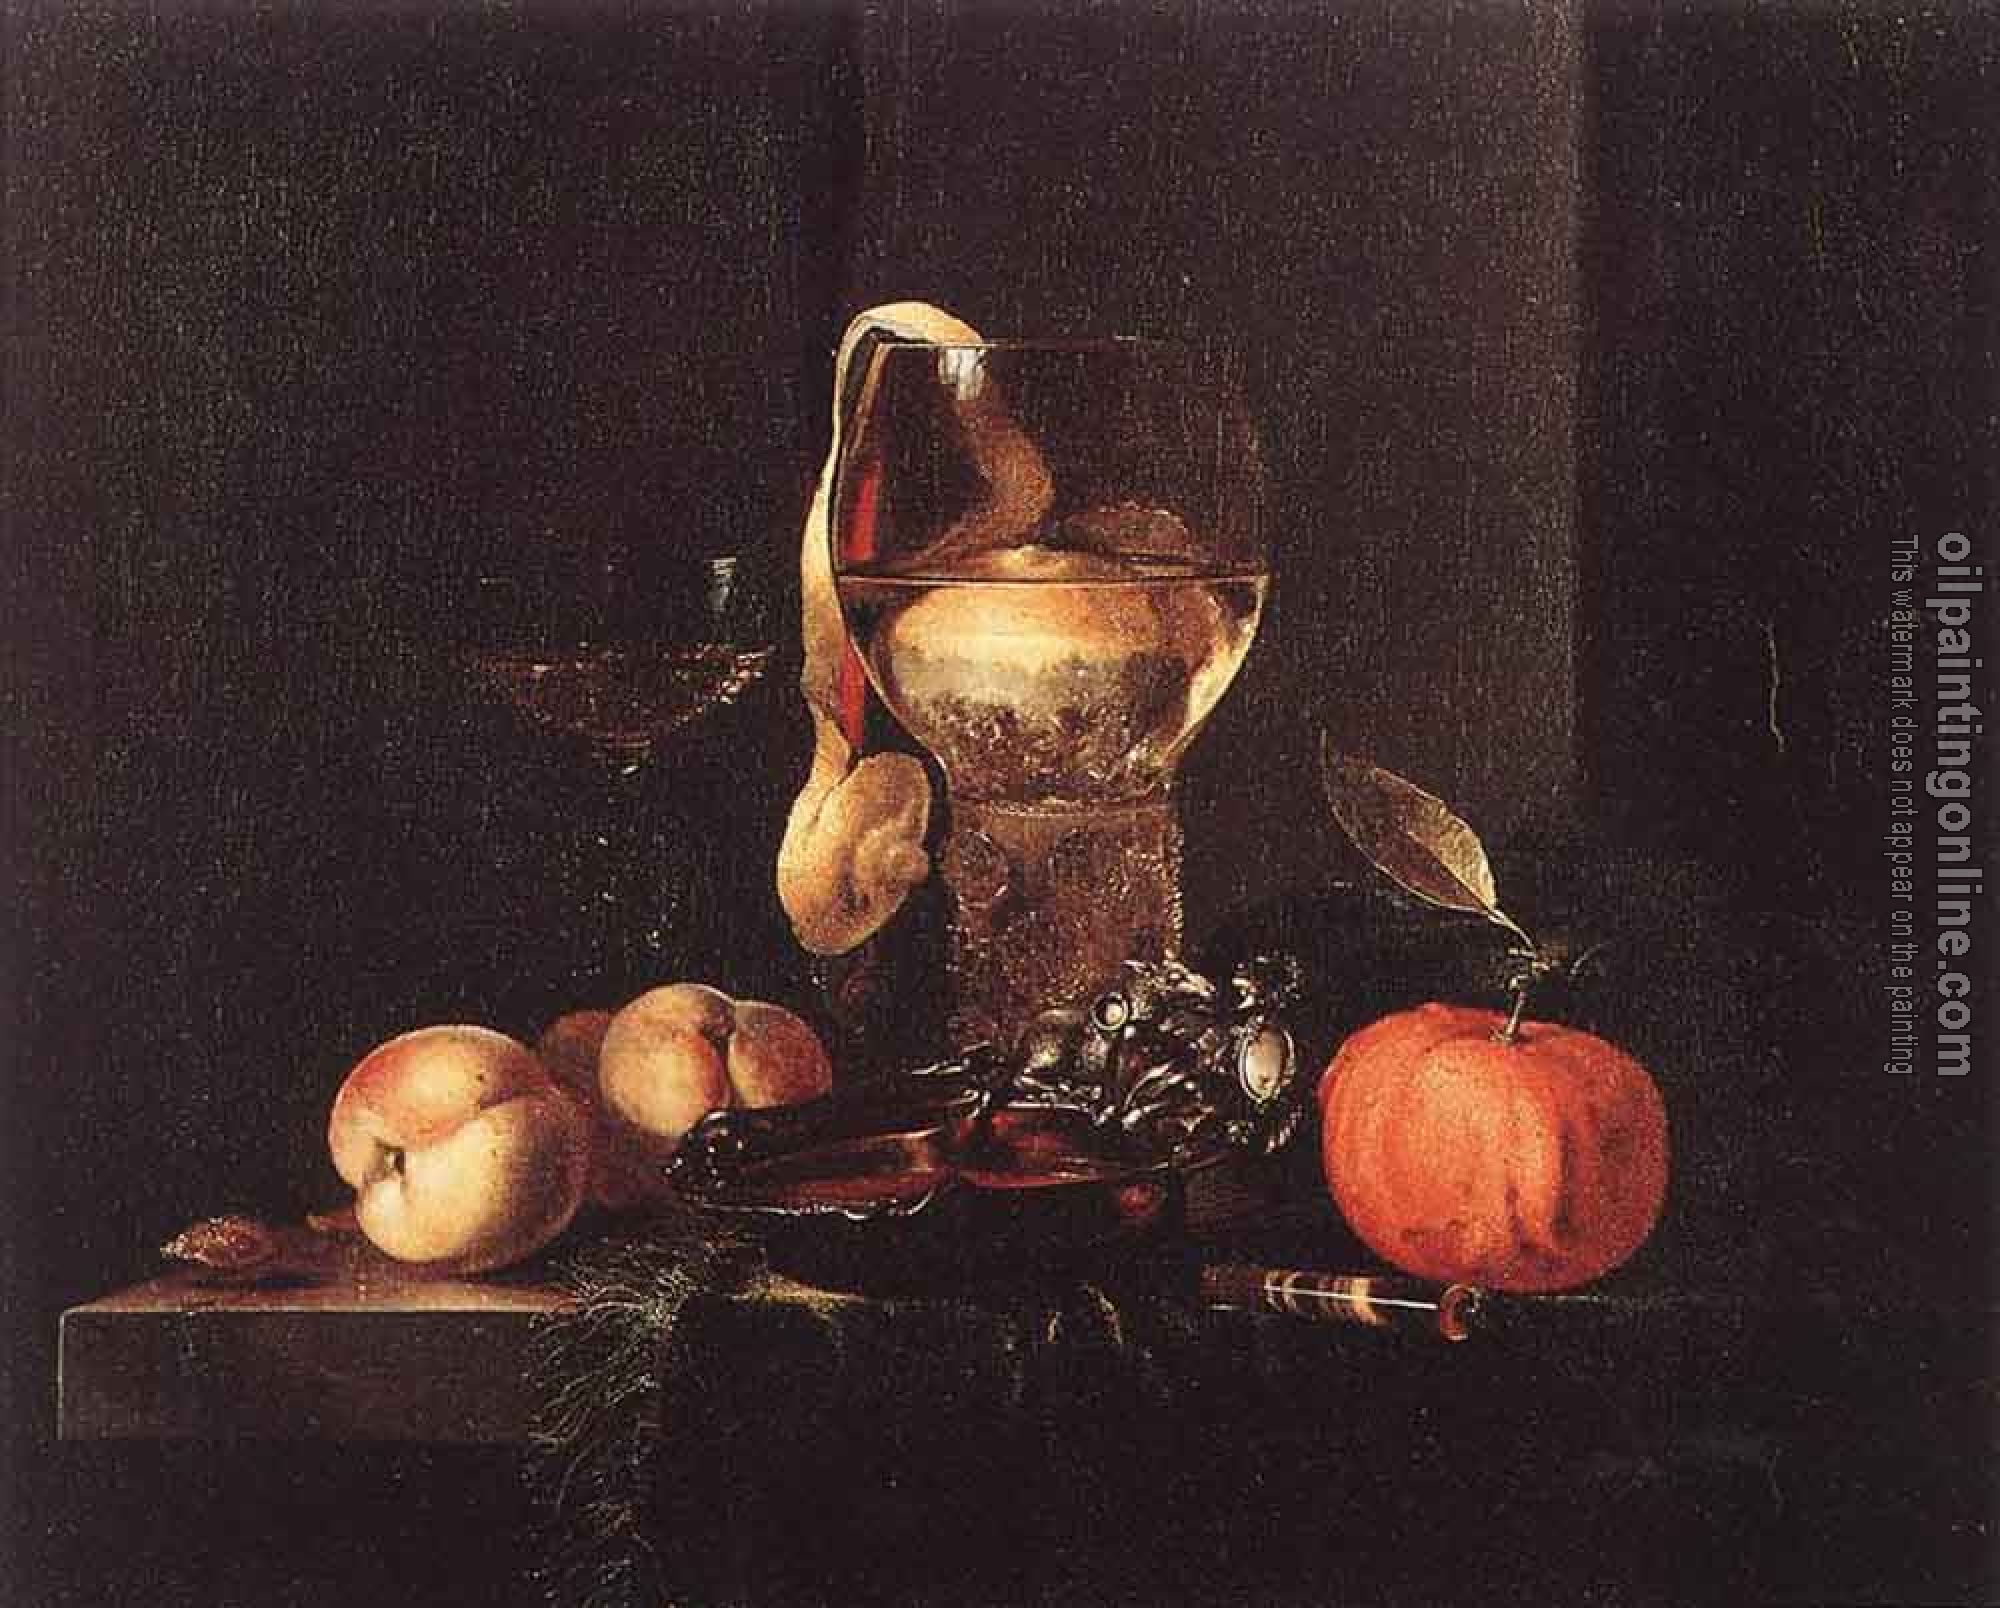 Willem Kalf - Still Life With Silver Bowl Glasses And Fruit